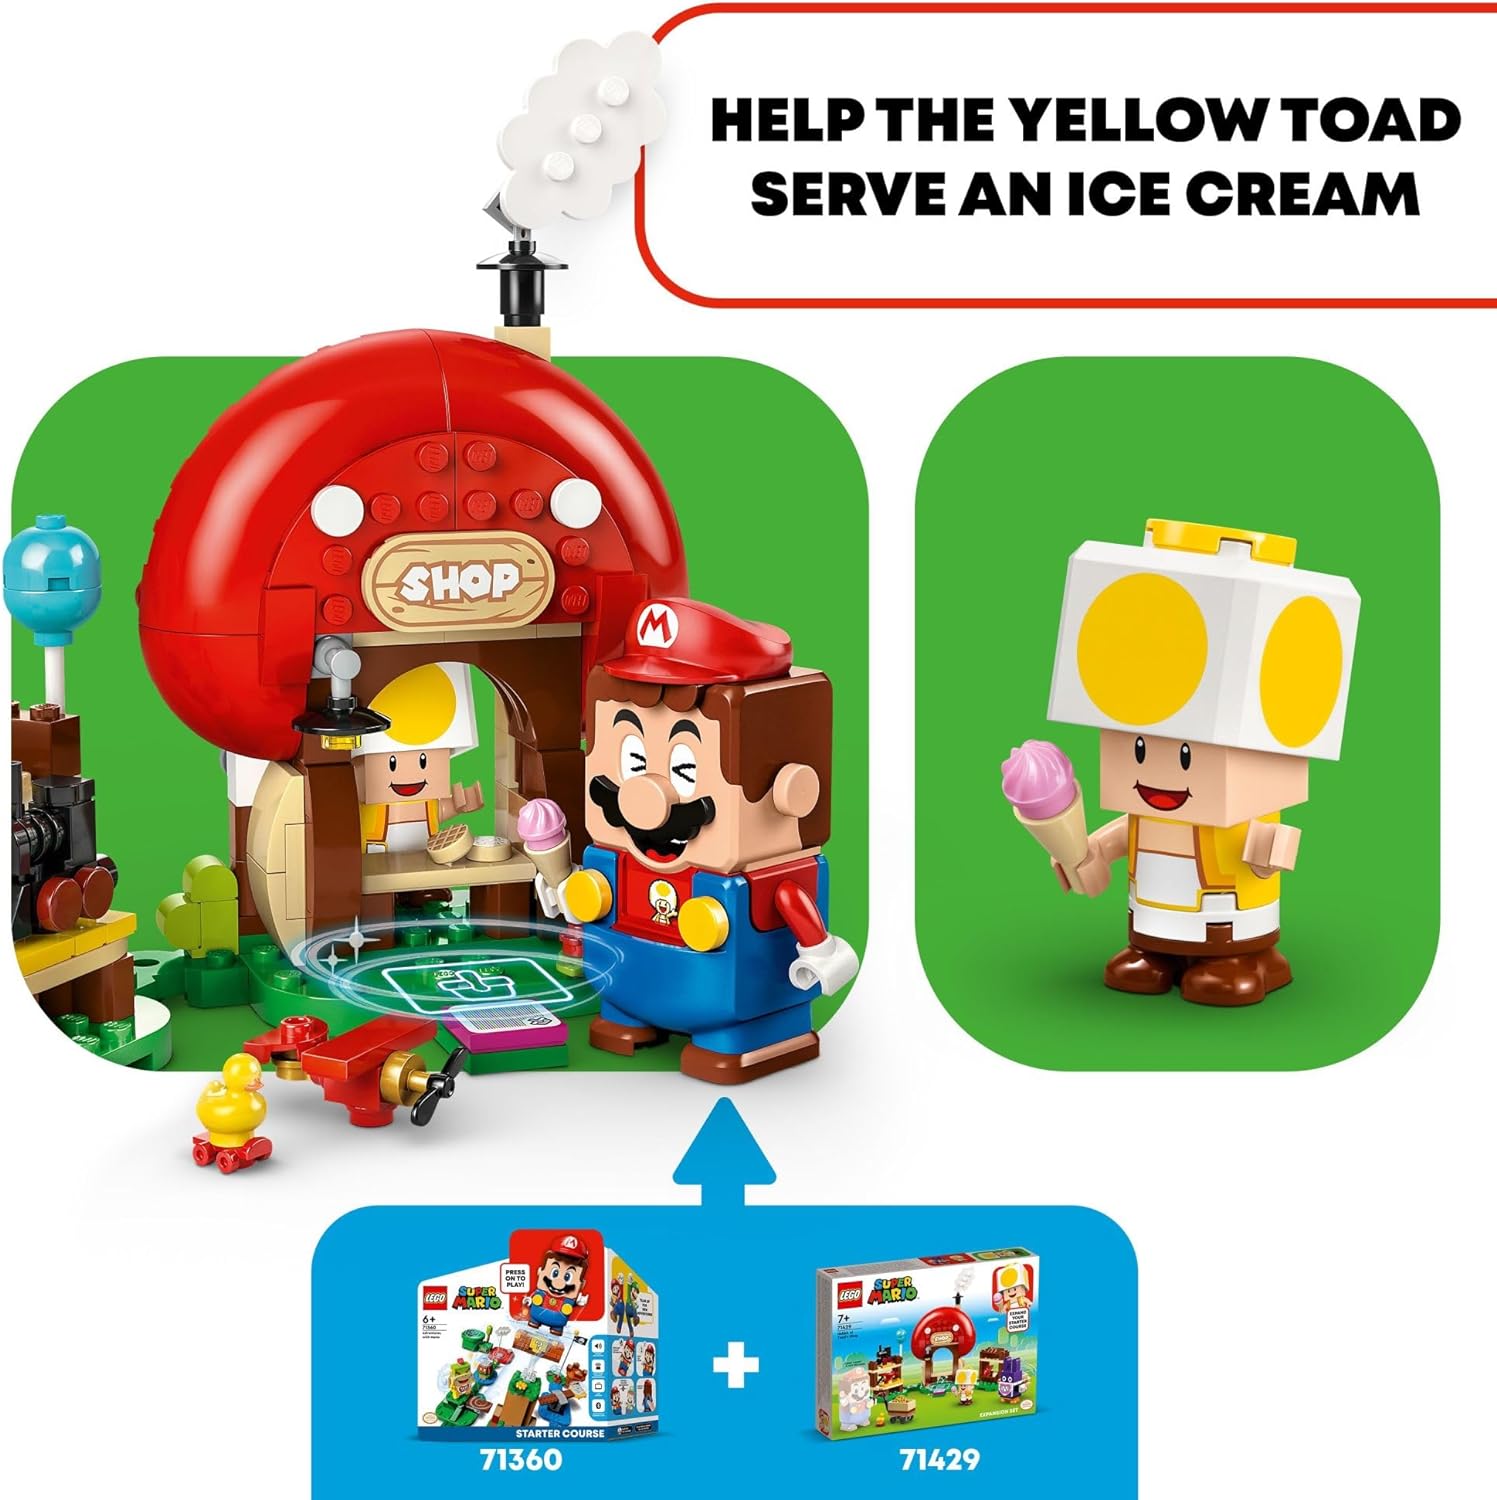 LEGO 71429 Super Mario Nabbit at Toad’s Shop Expansion Set, Build and Display Super Mario Day Toy for Kids, Video Game Toy Gift Idea for Gamers.